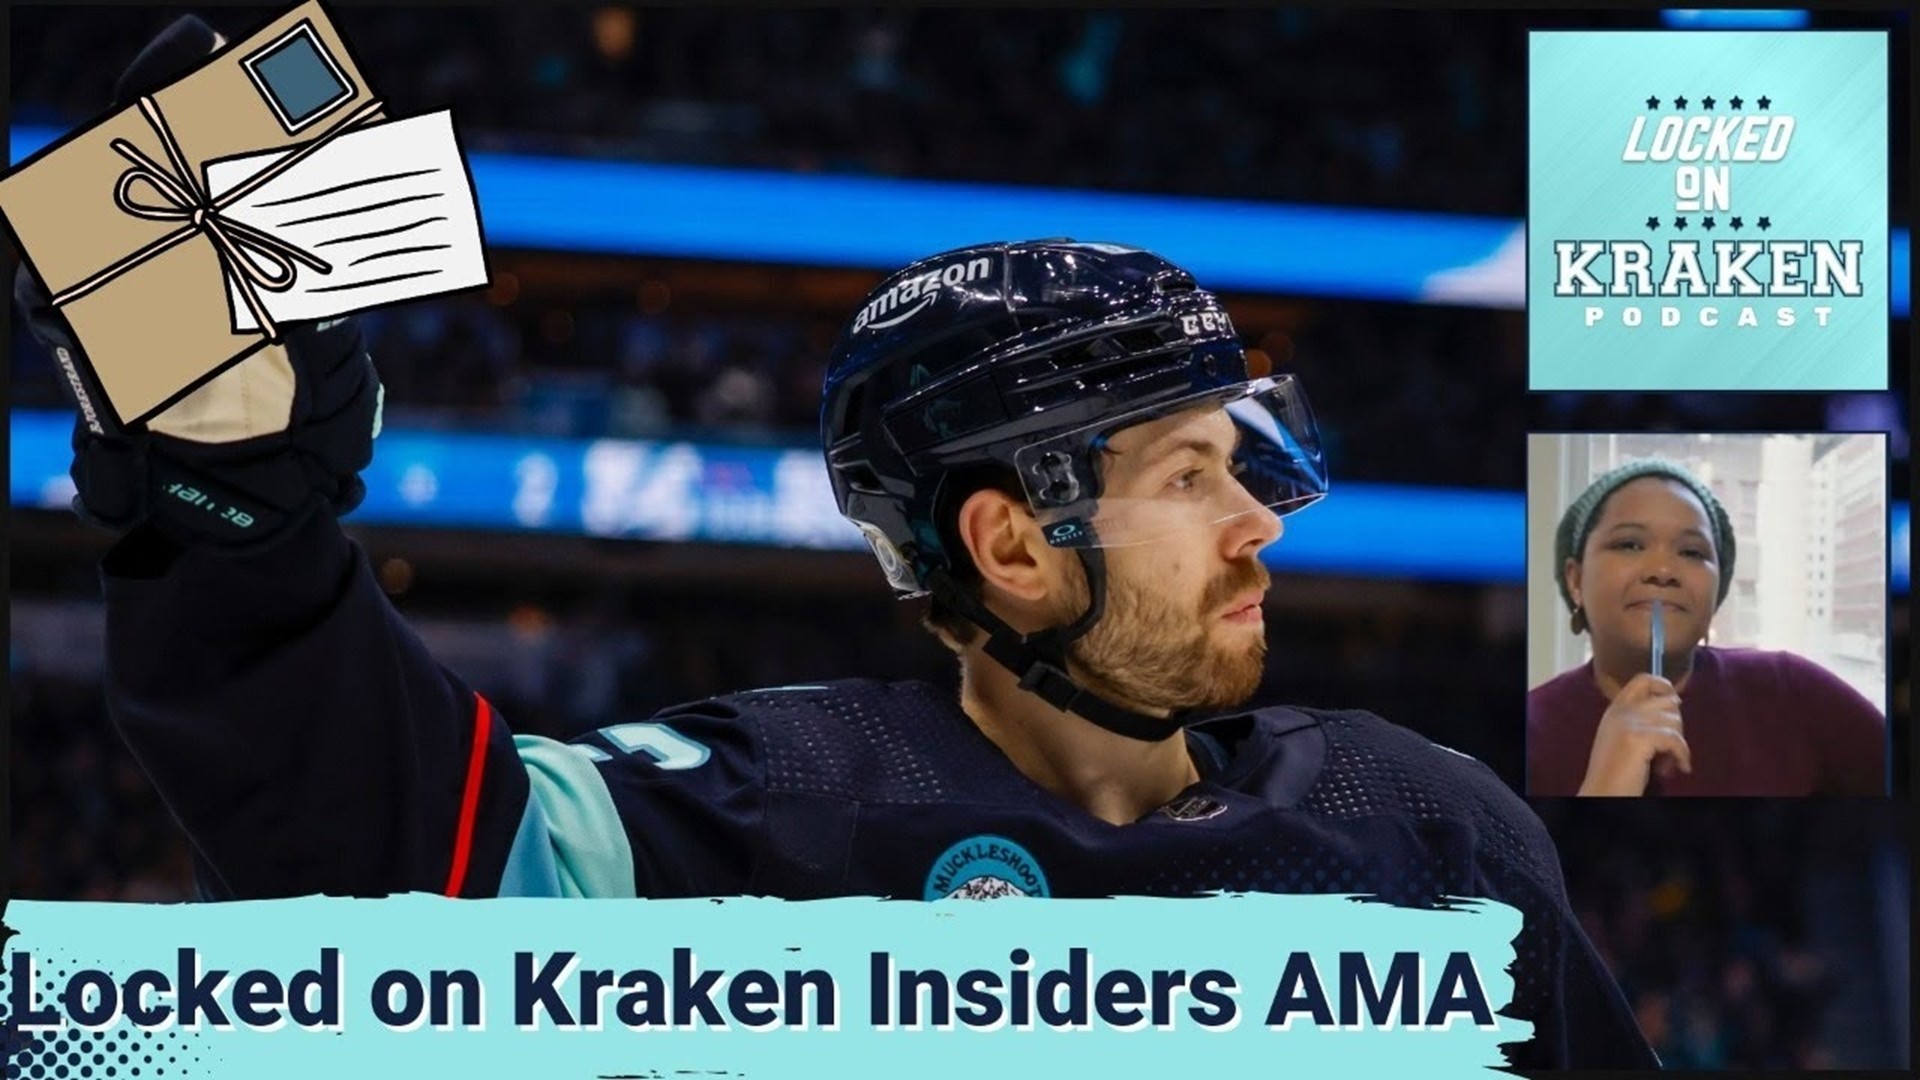 I've called for your questions all week! Now, join Locked on Kraken host Erica L. Ayala 30 minutes before the pregame show for a quick AMA session.